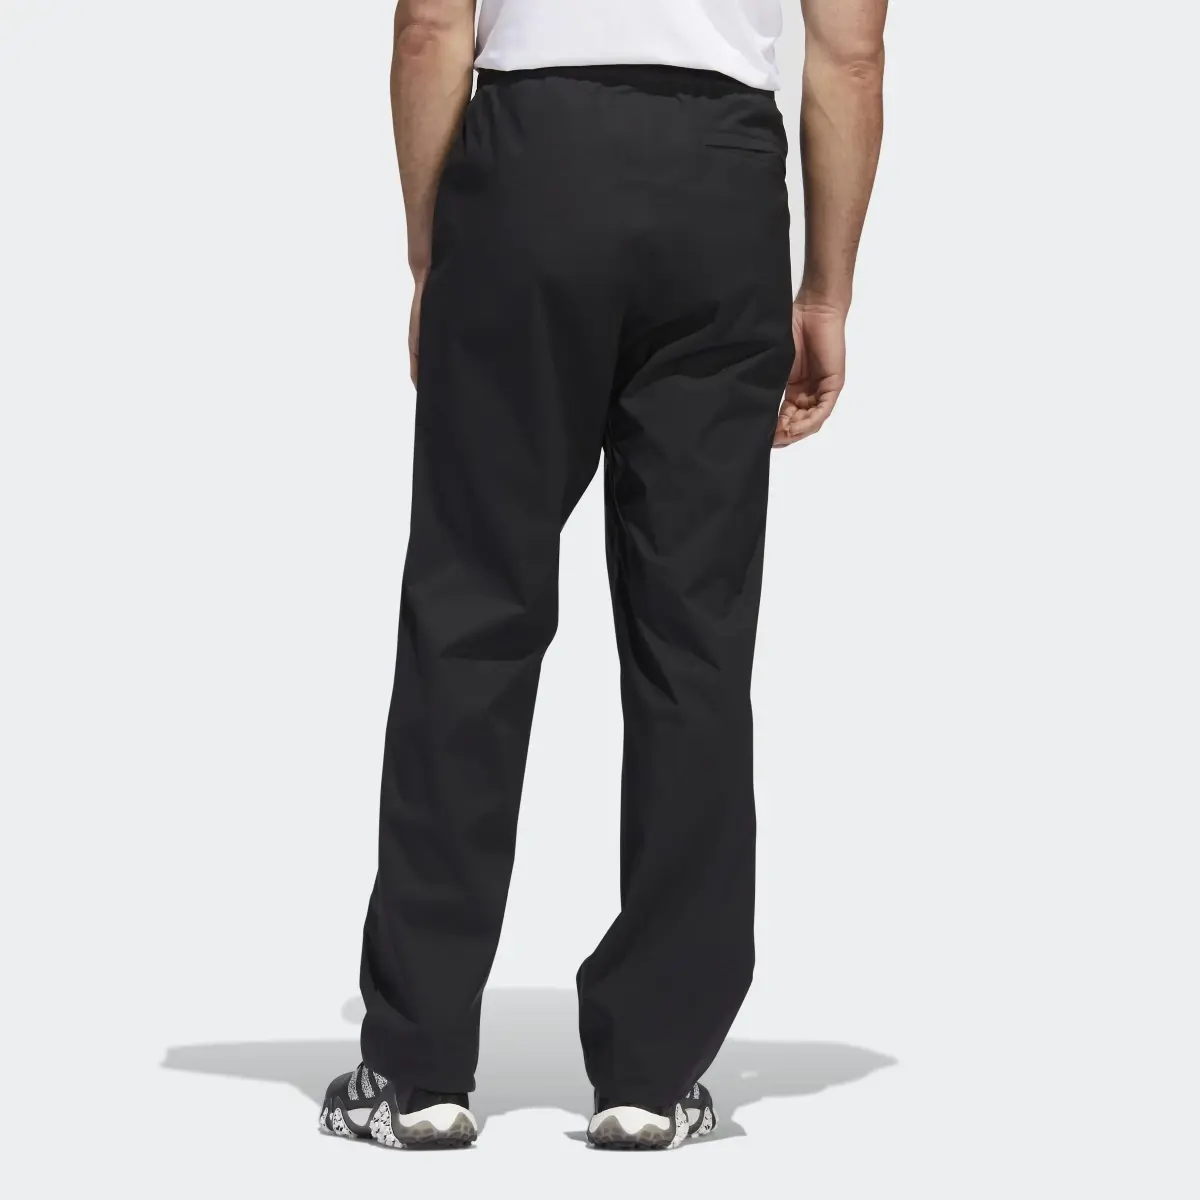 Adidas Provisional Golf Tracksuit Bottoms. 2